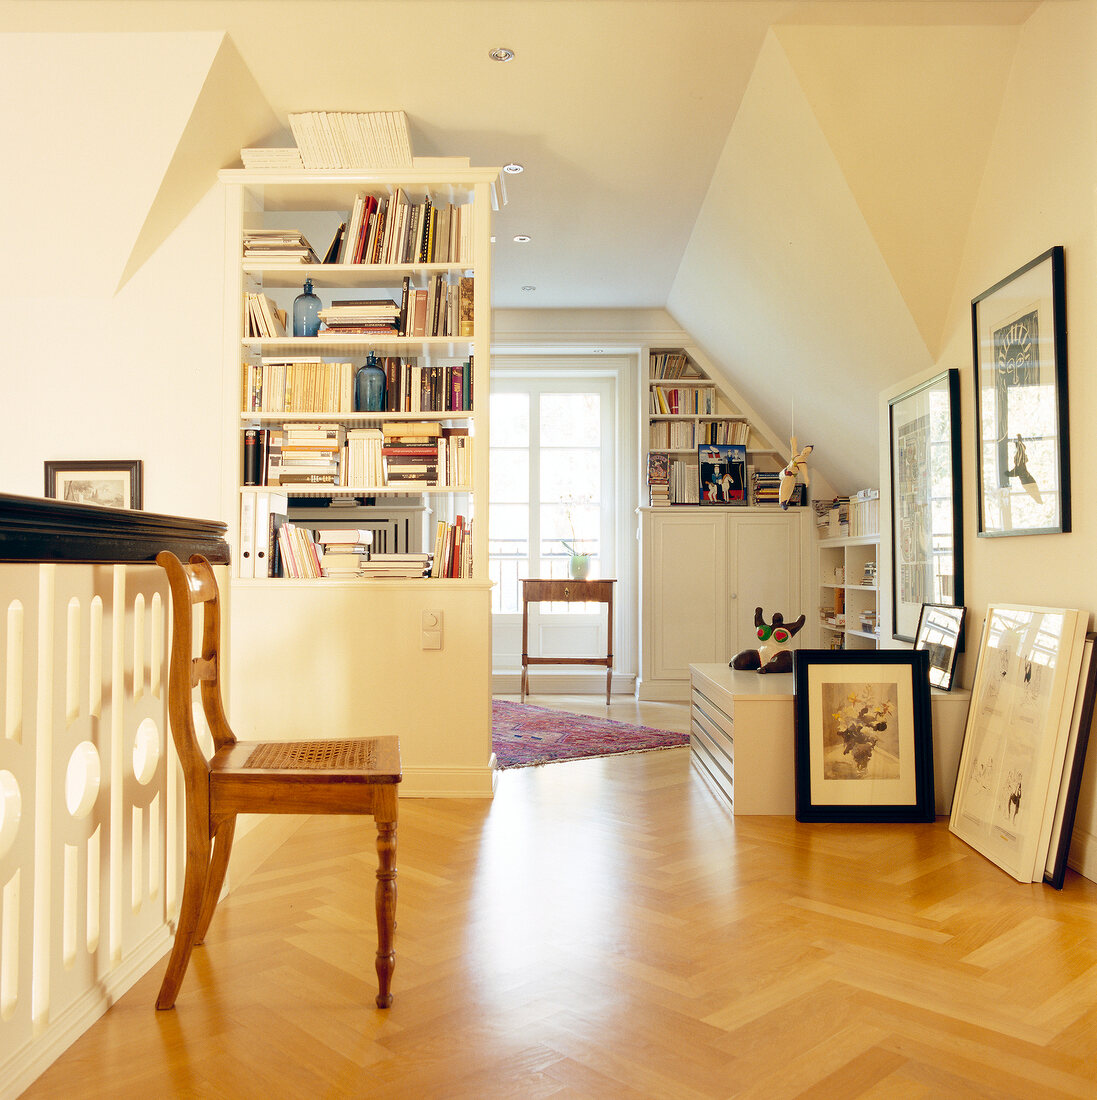 View of living room with framed pictures on wall, chair and parquet flooring